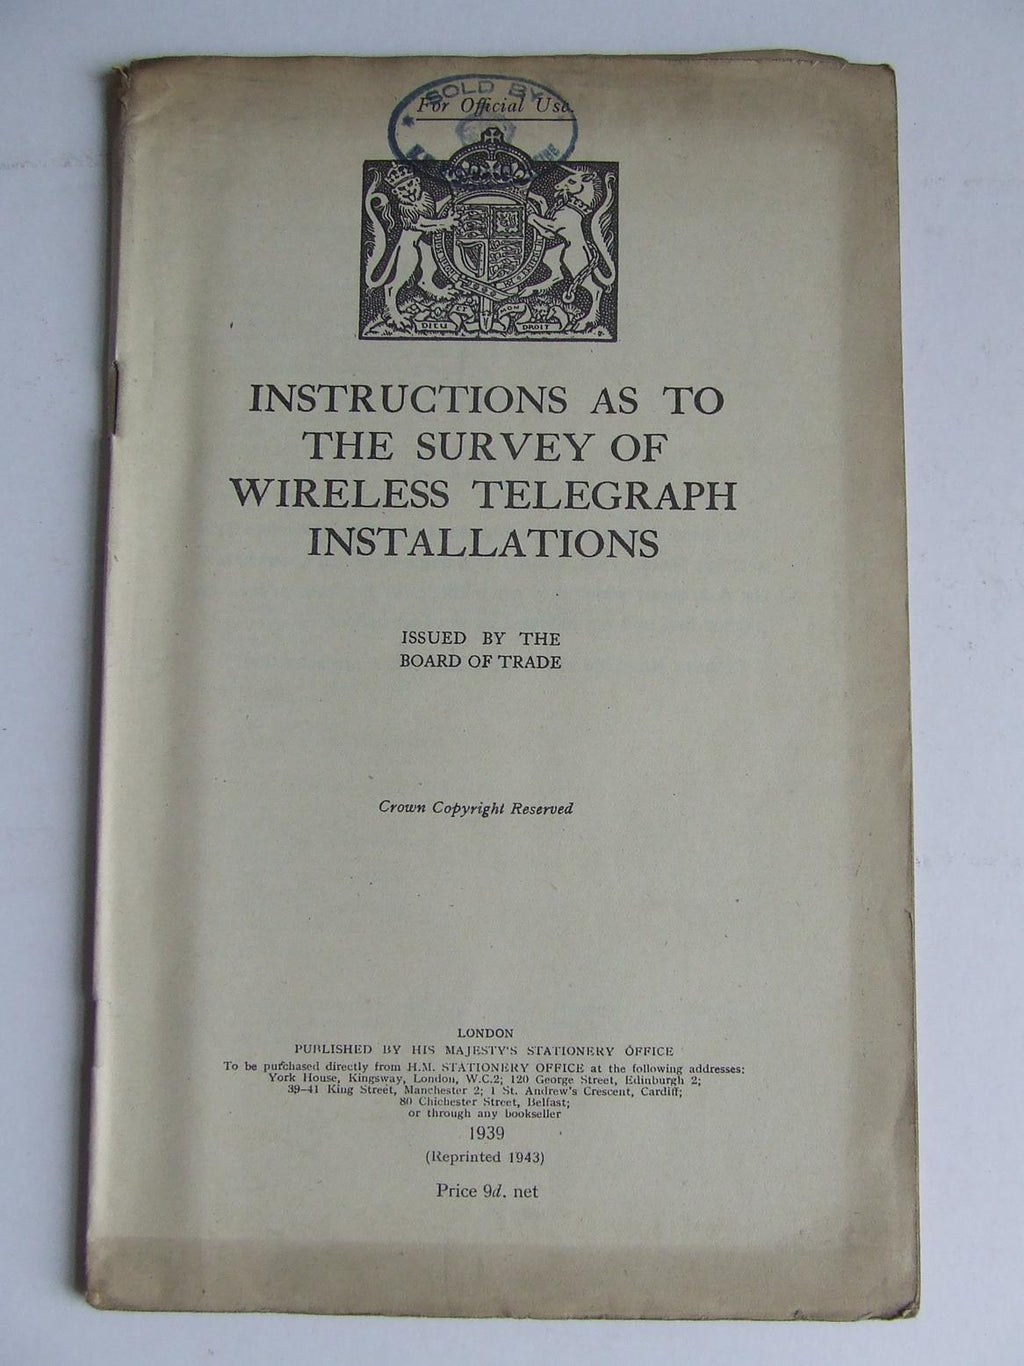 Instructions as to the Survey of Wireless Telegraph Installations